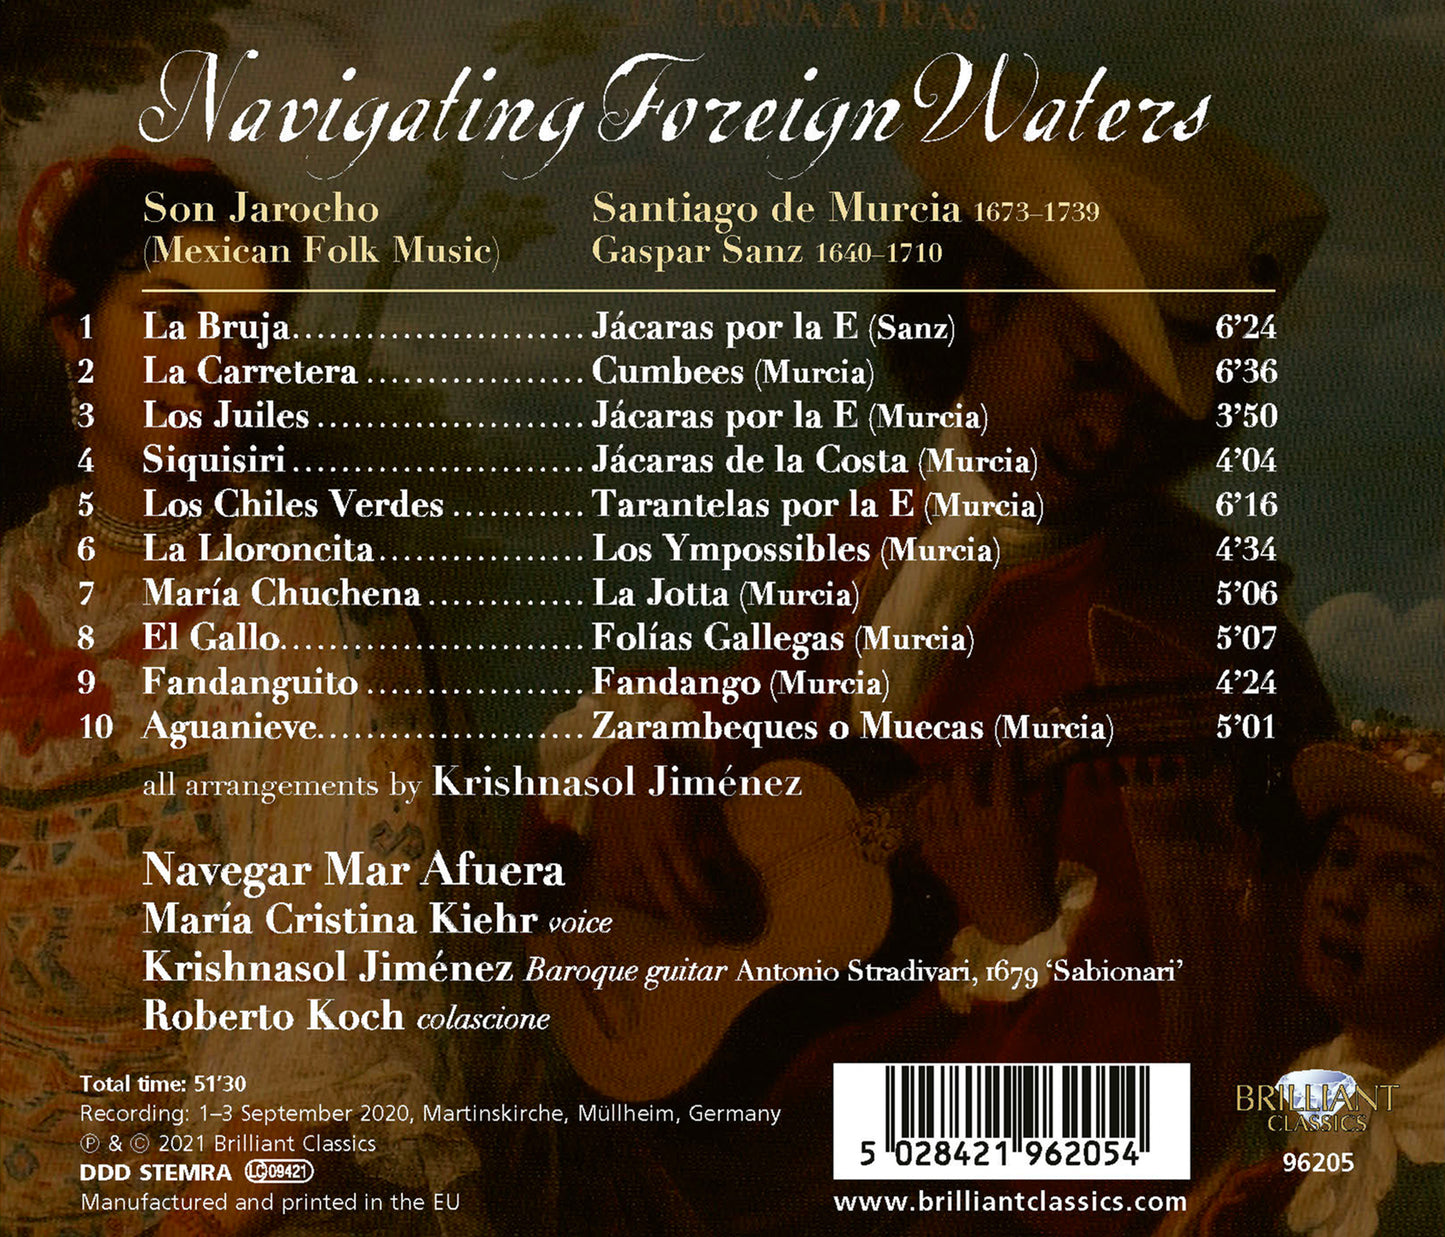 Navigating Foreign Waters: Spanish Baroque Music & Mexican F